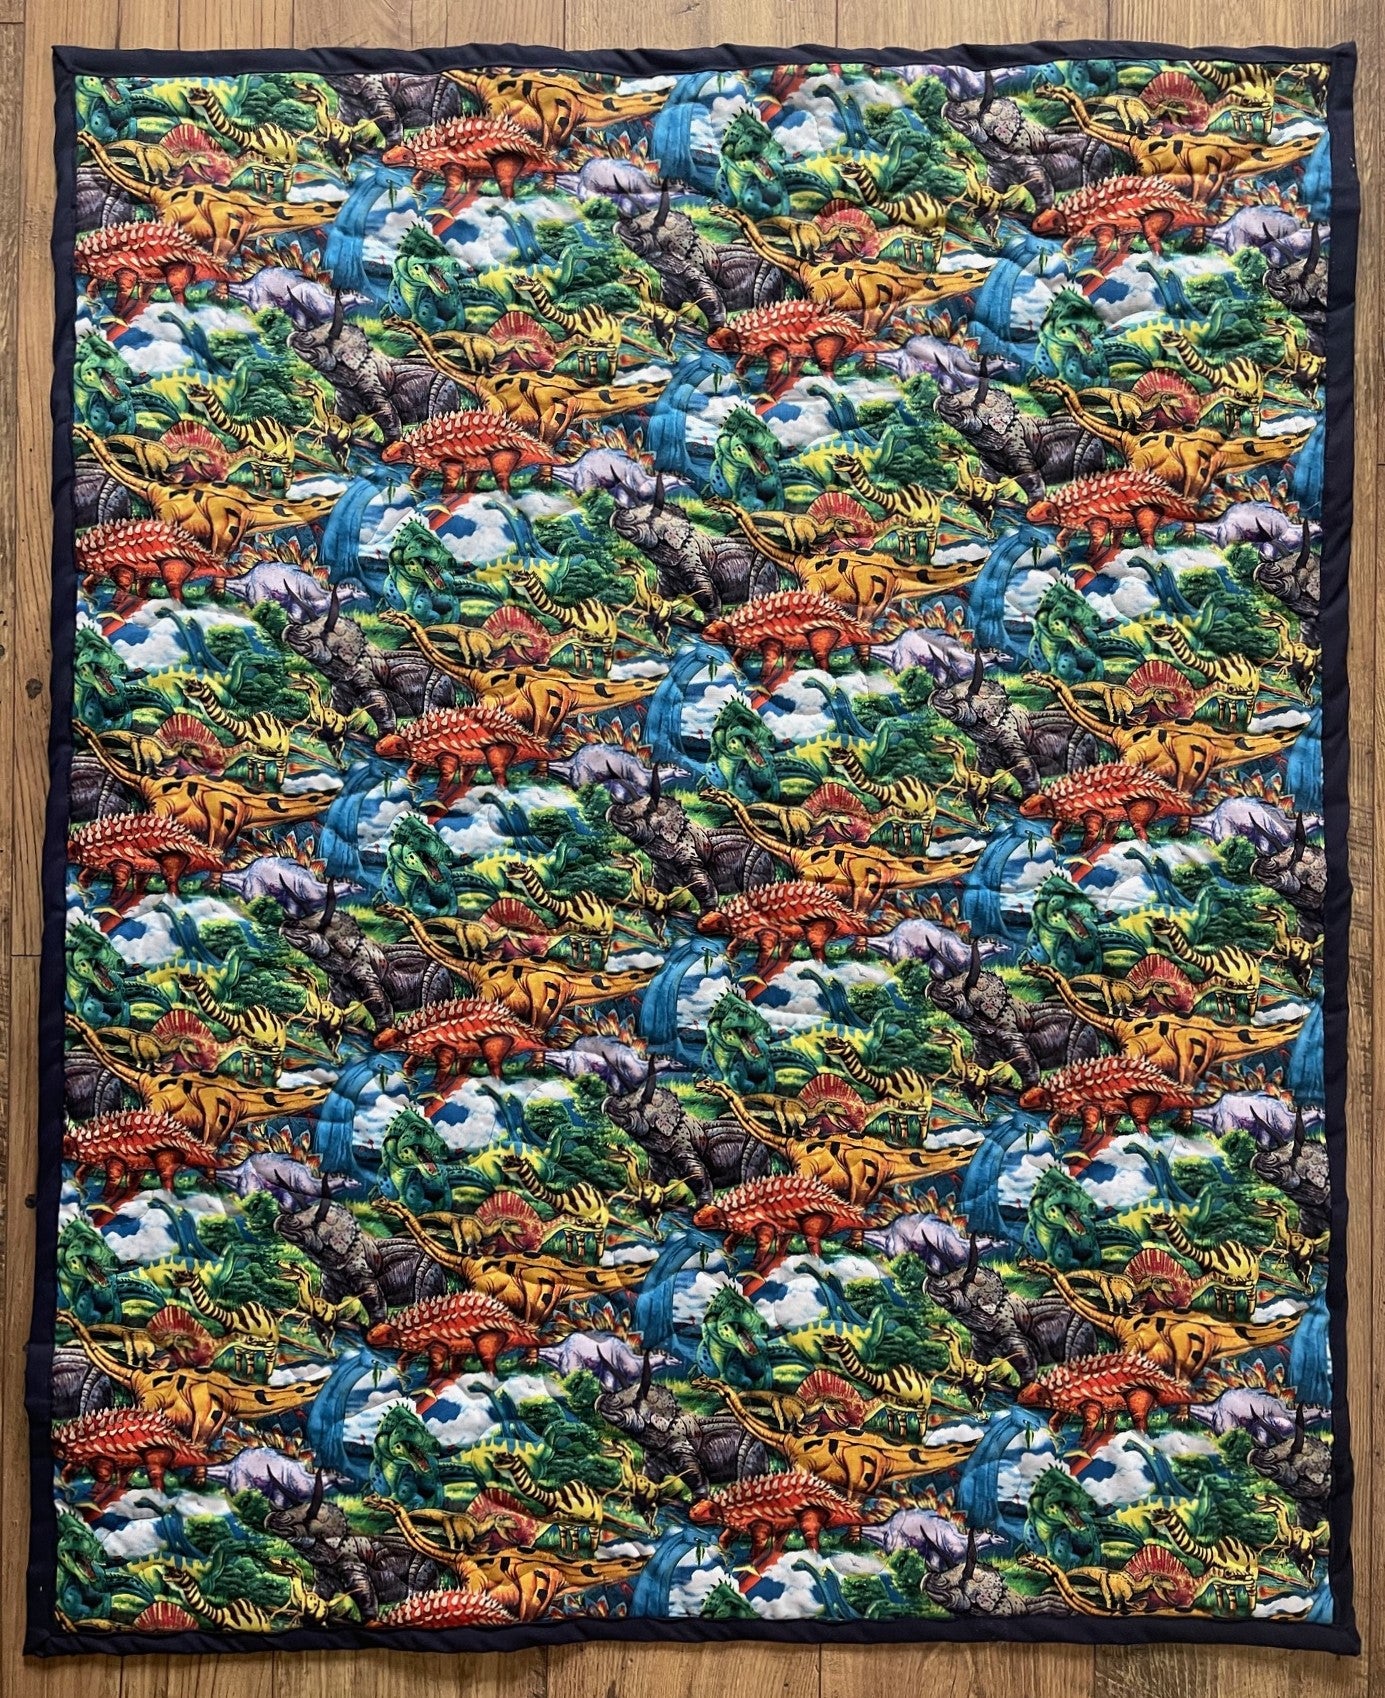 JURASSIC DINOSAURS INSPIRED QUILTED BLANKET